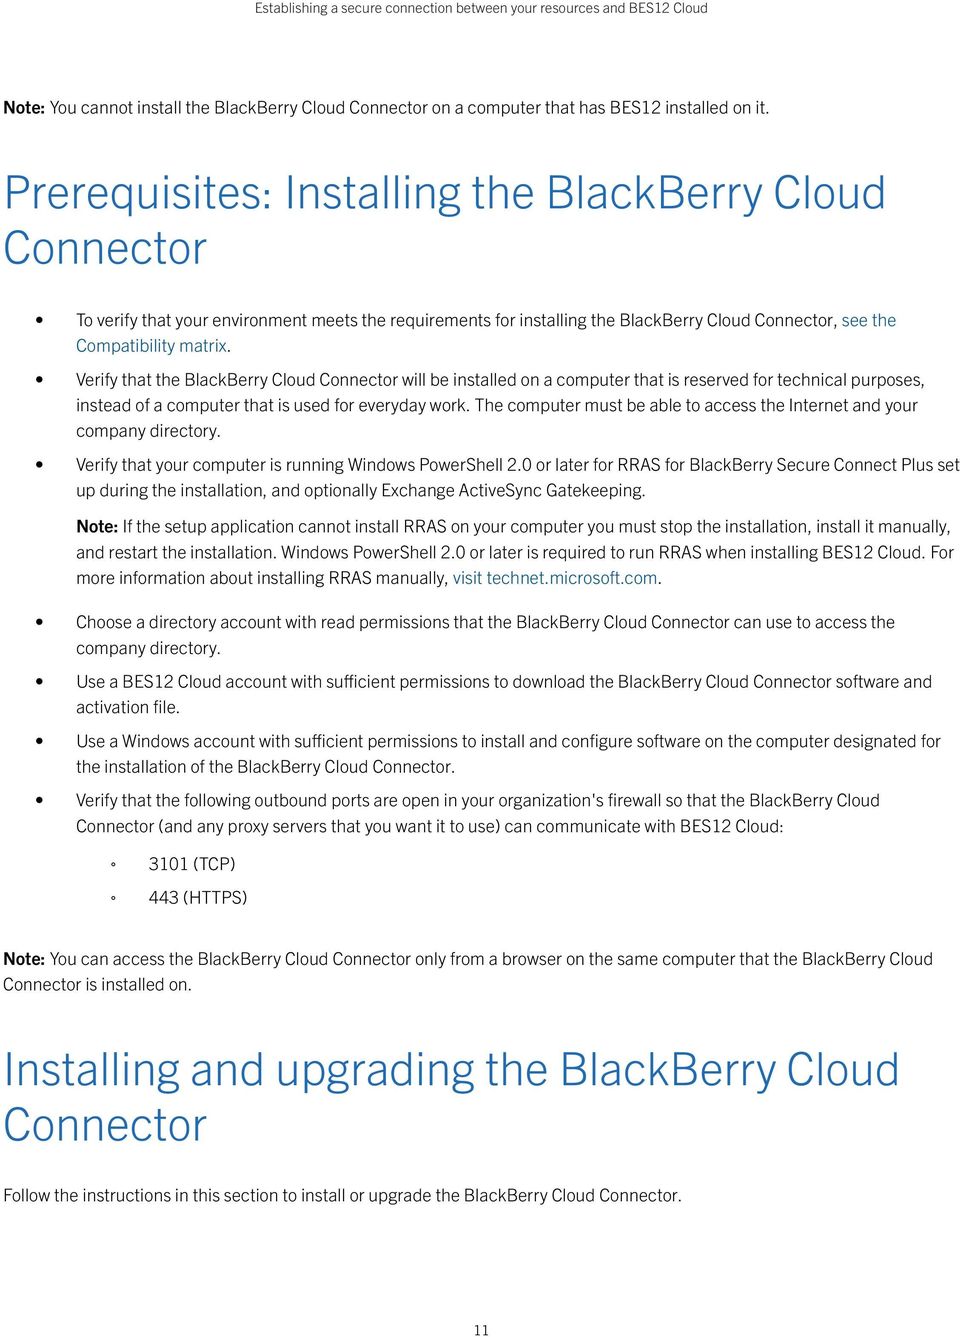 Verify that the BlackBerry Cloud Connector will be installed on a computer that is reserved for technical purposes, instead of a computer that is used for everyday work.